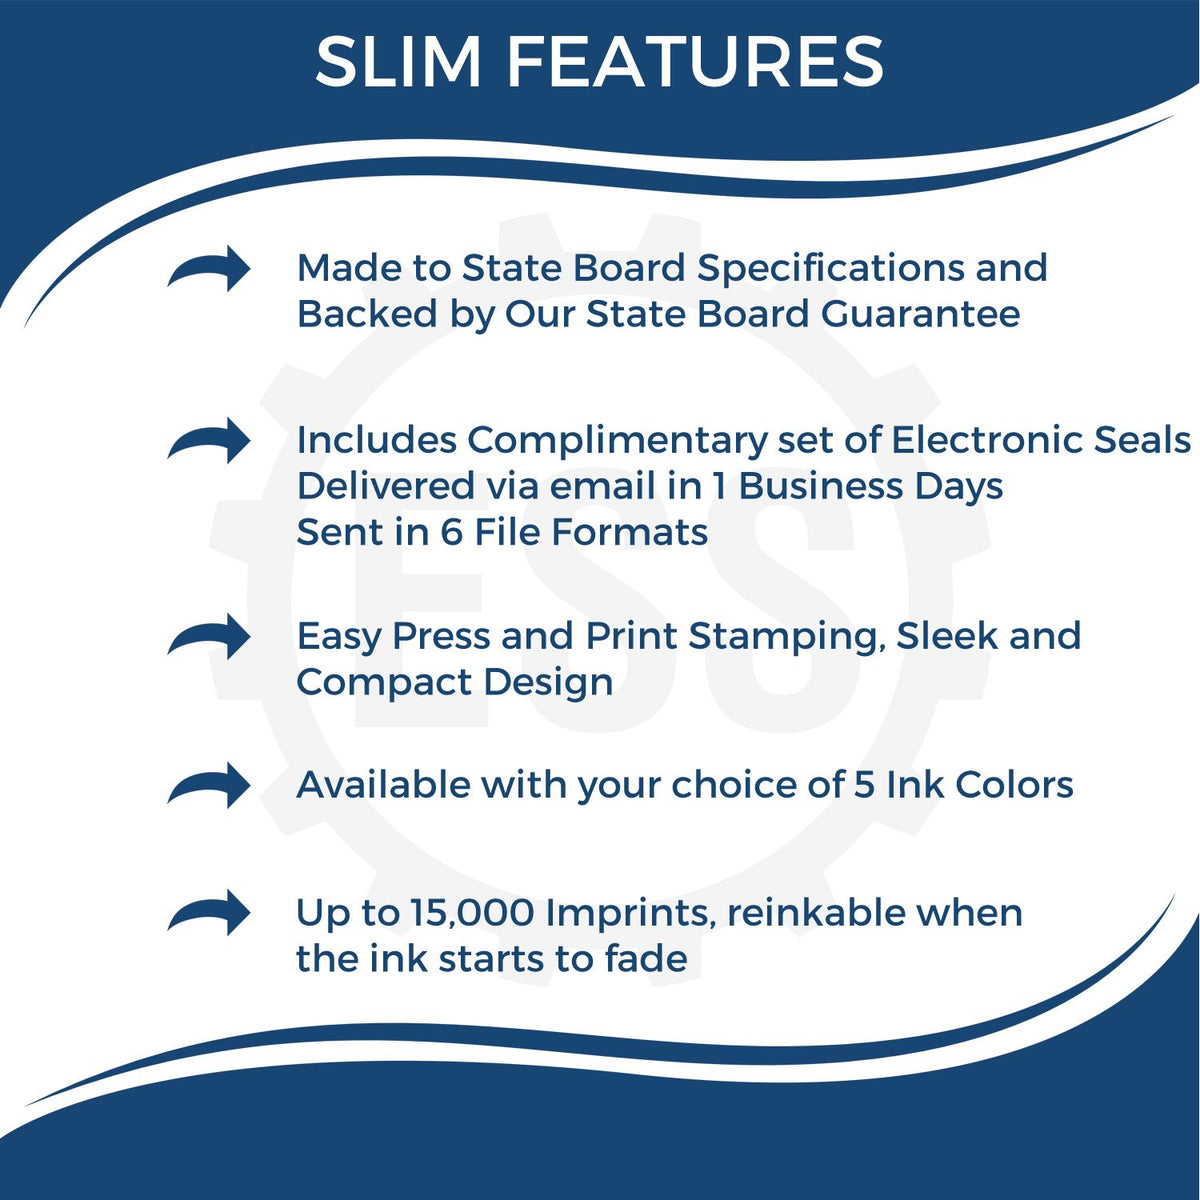 A picture of an infographic highlighting the selling points for the Slim Pre-Inked Minnesota Land Surveyor Seal Stamp